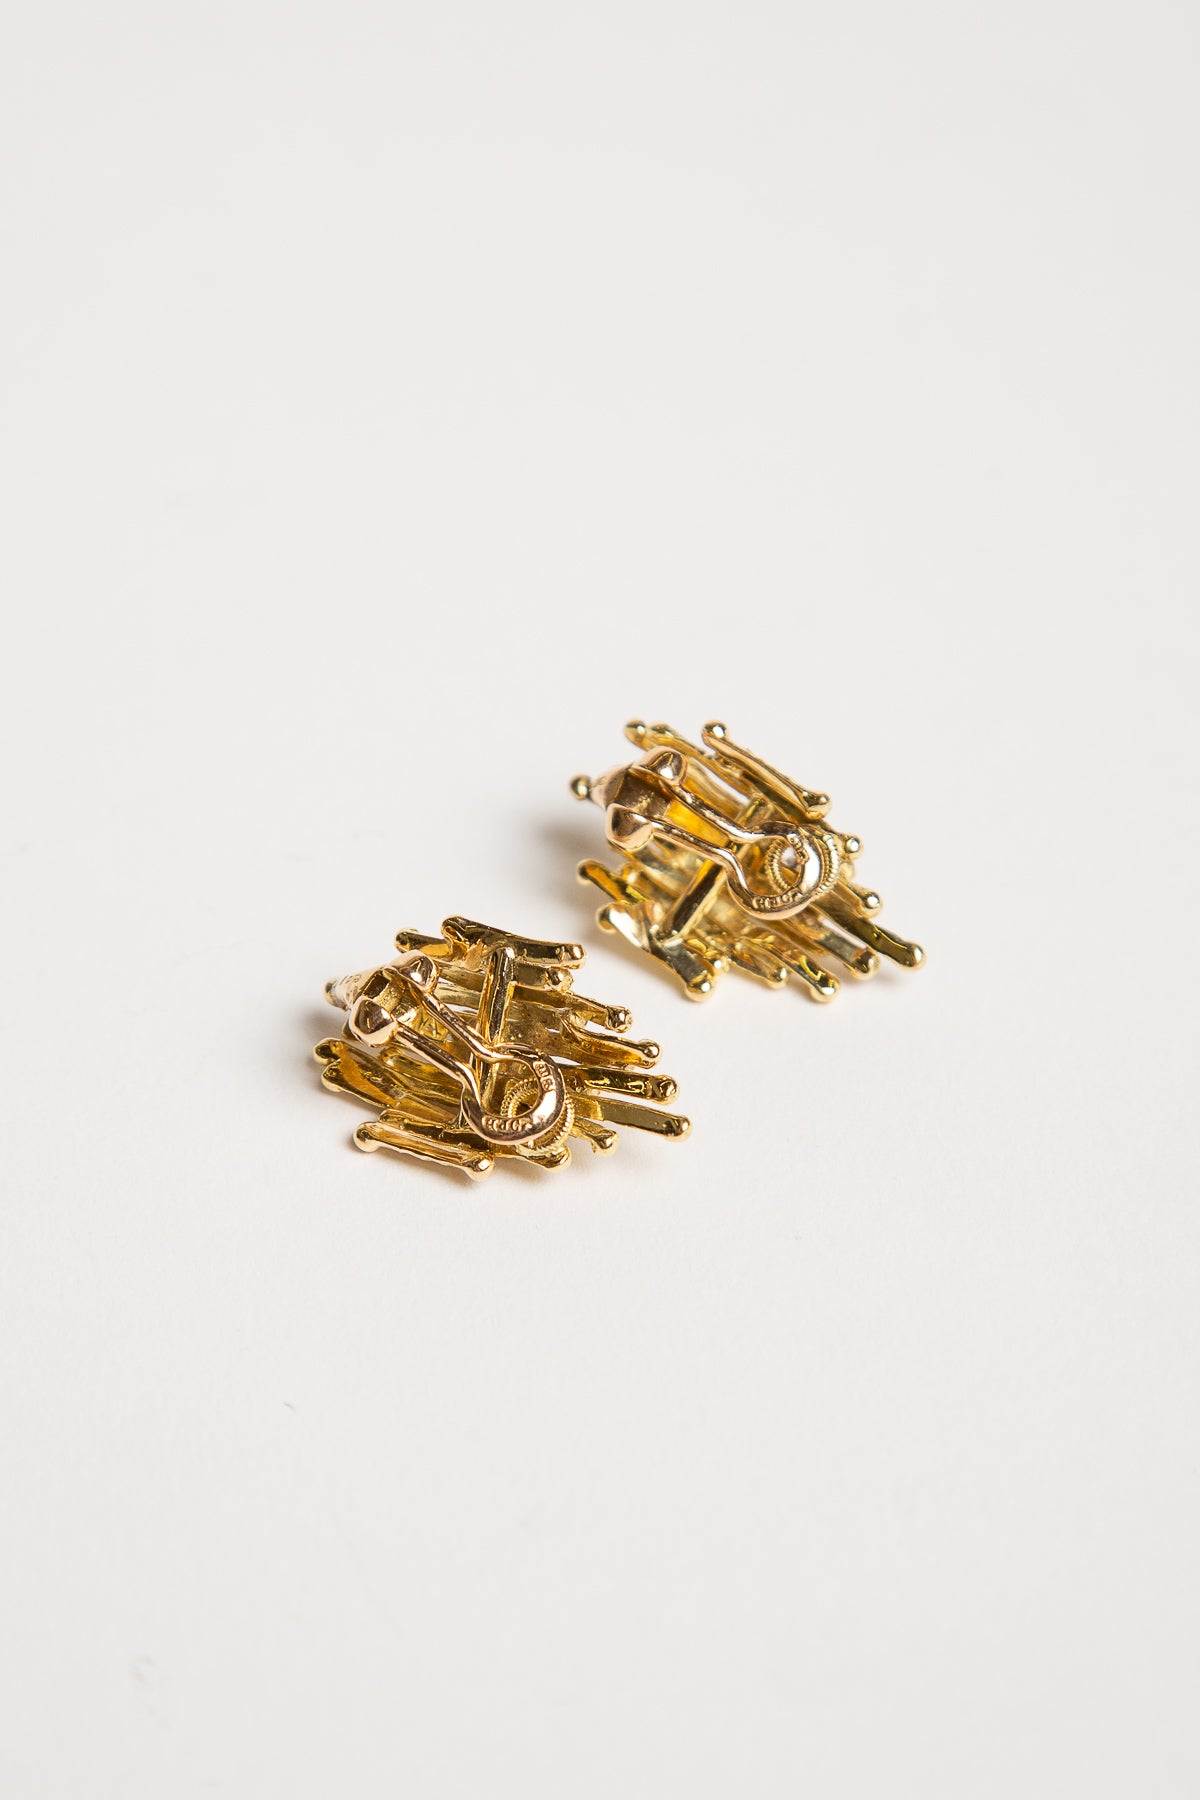 MAXFIELD COLLECTION | ANDREW GRIMA 18K GOLD & DIAMOND EARRINGS